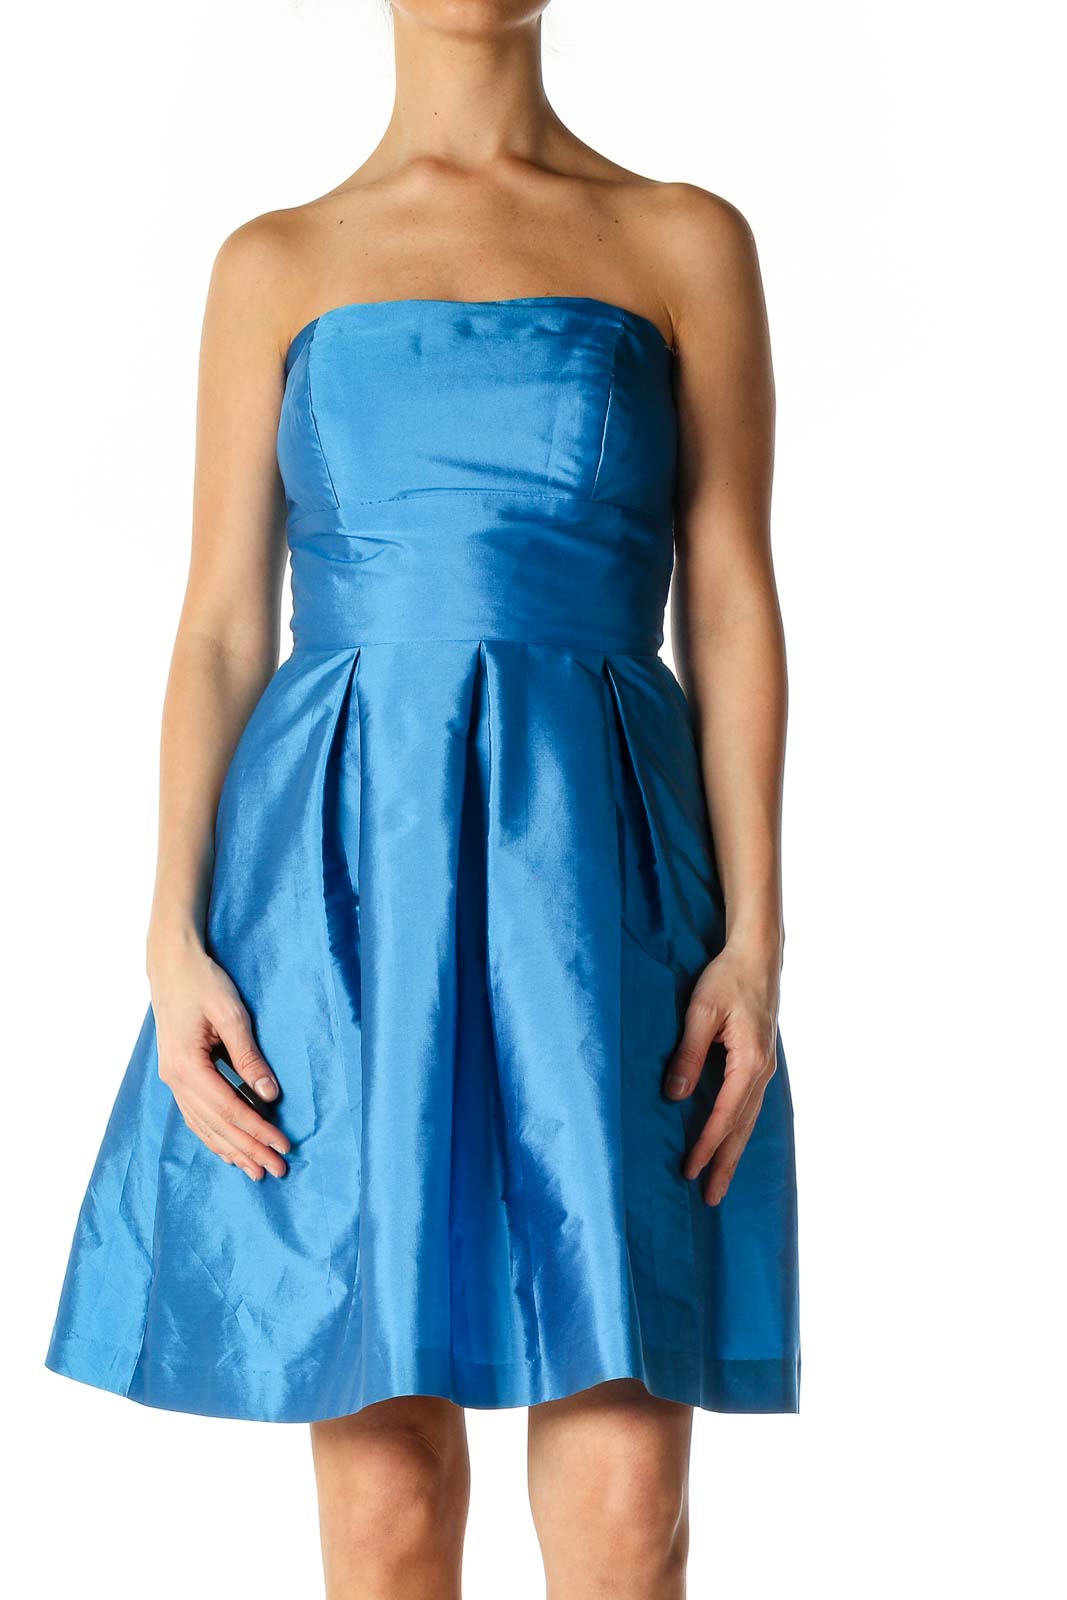 Blue Solid Chic A-Line Dress Front